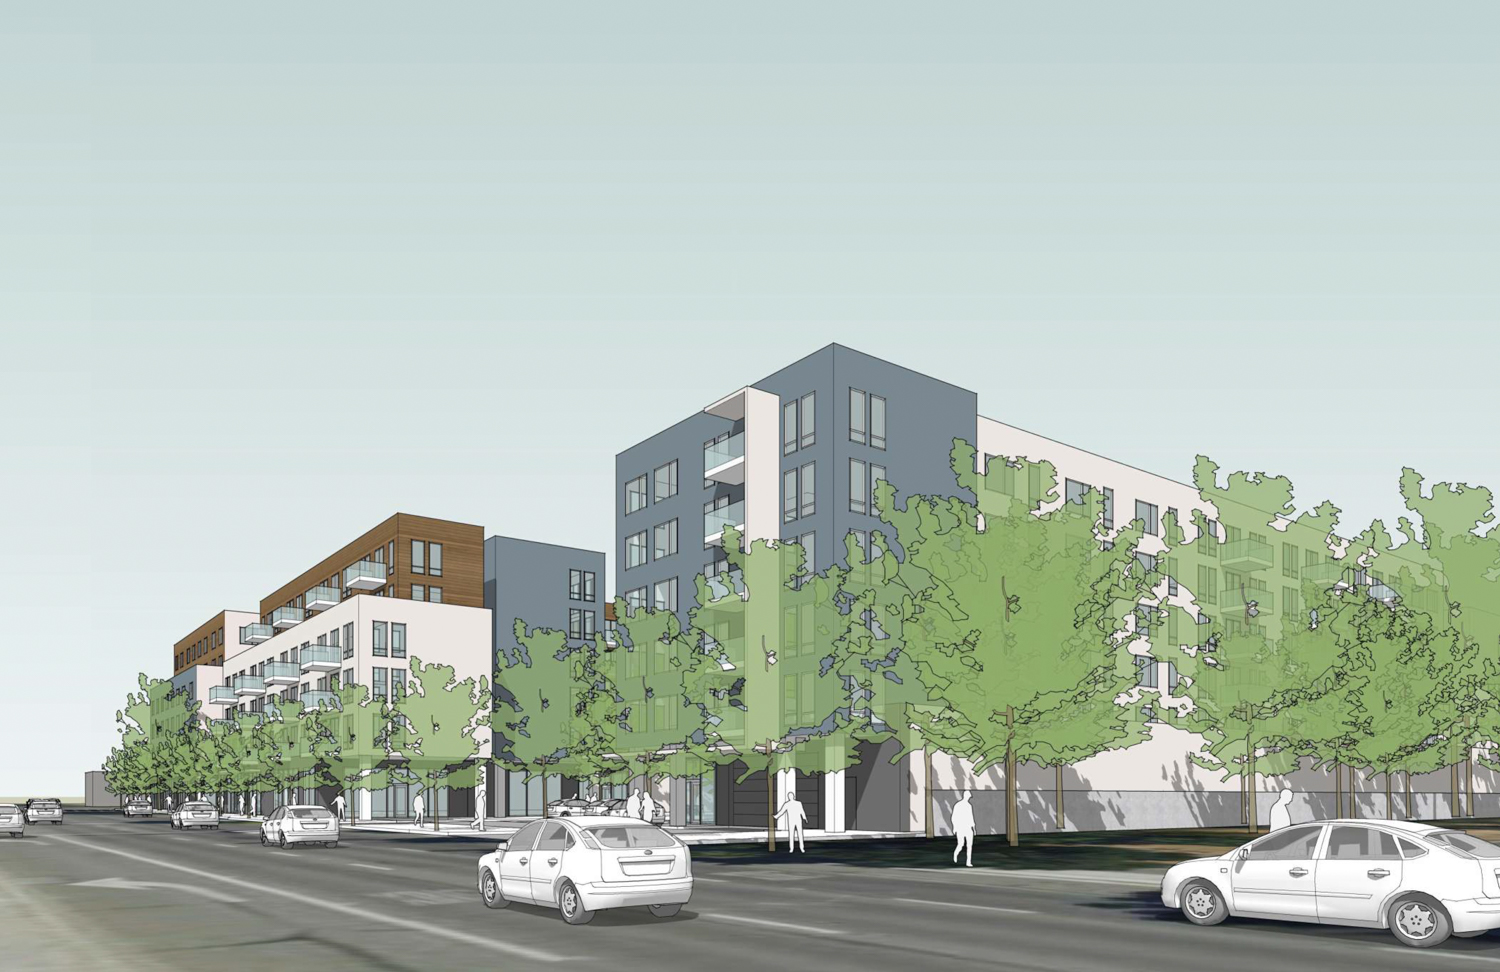 3400 El Camino Real view from the north, rendering by Lowney Architecture